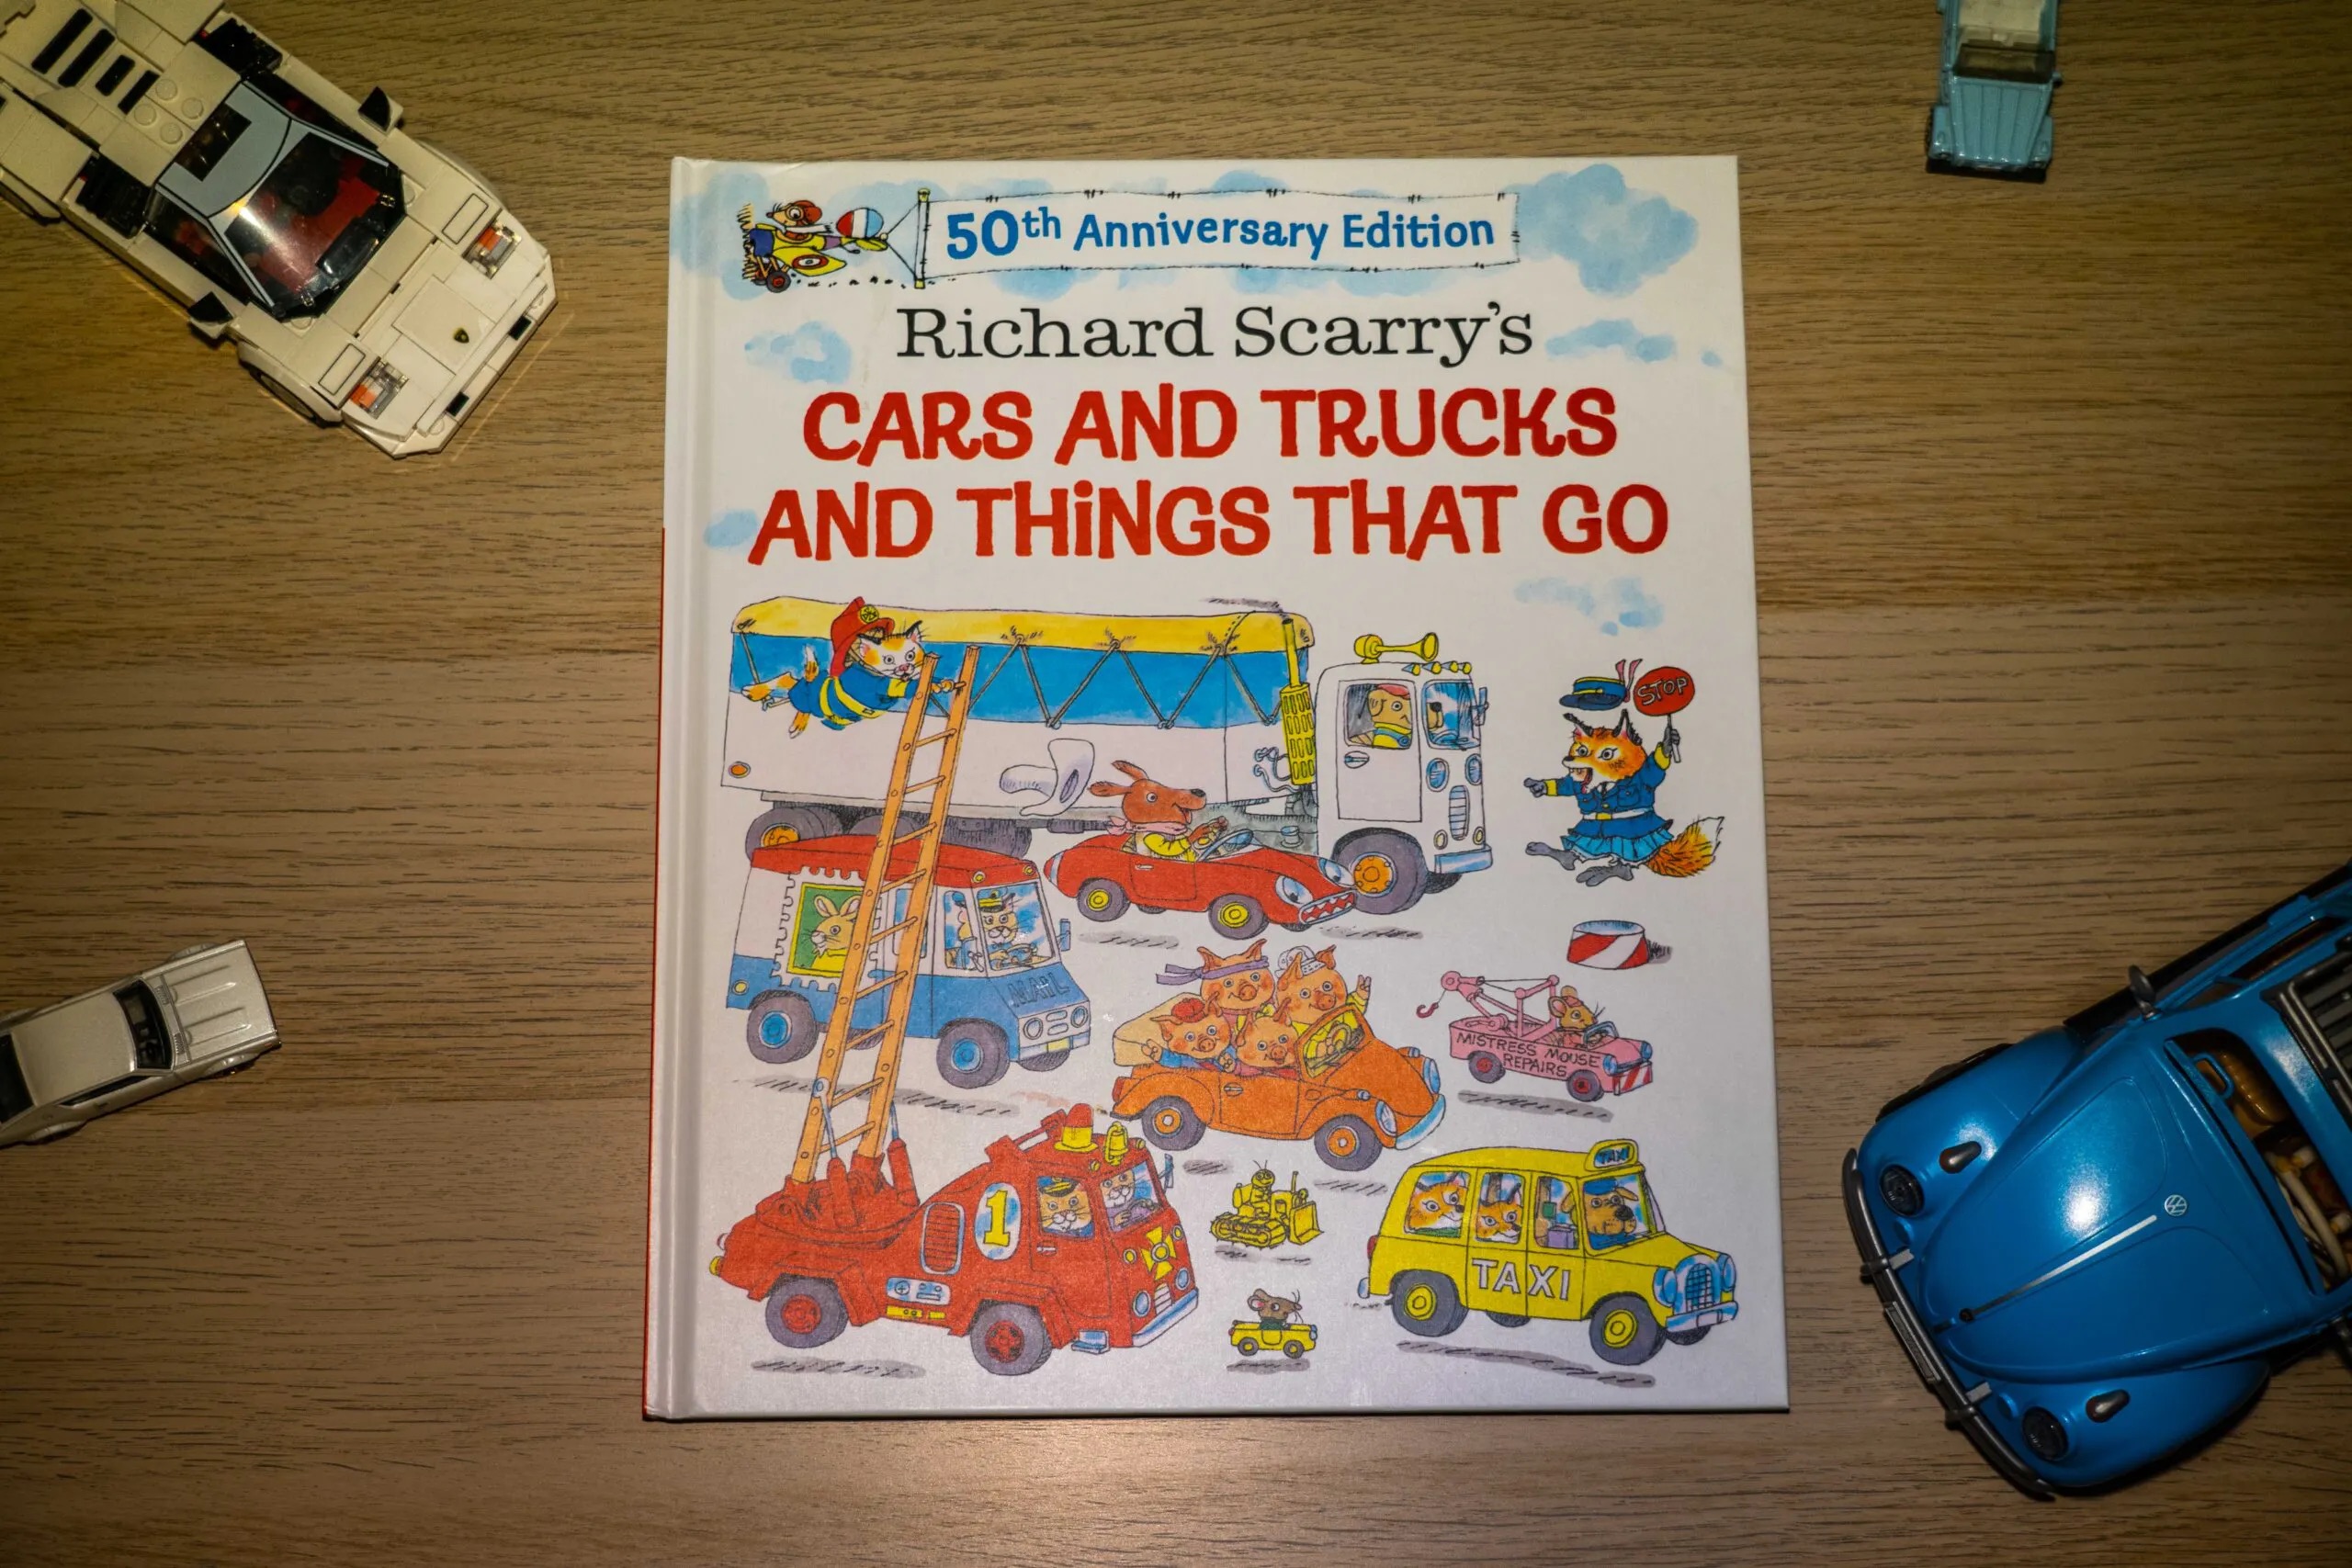 Richard Scarry’s Beloved Classic “Cars and Trucks and Things That Go” Is 50 Years Old